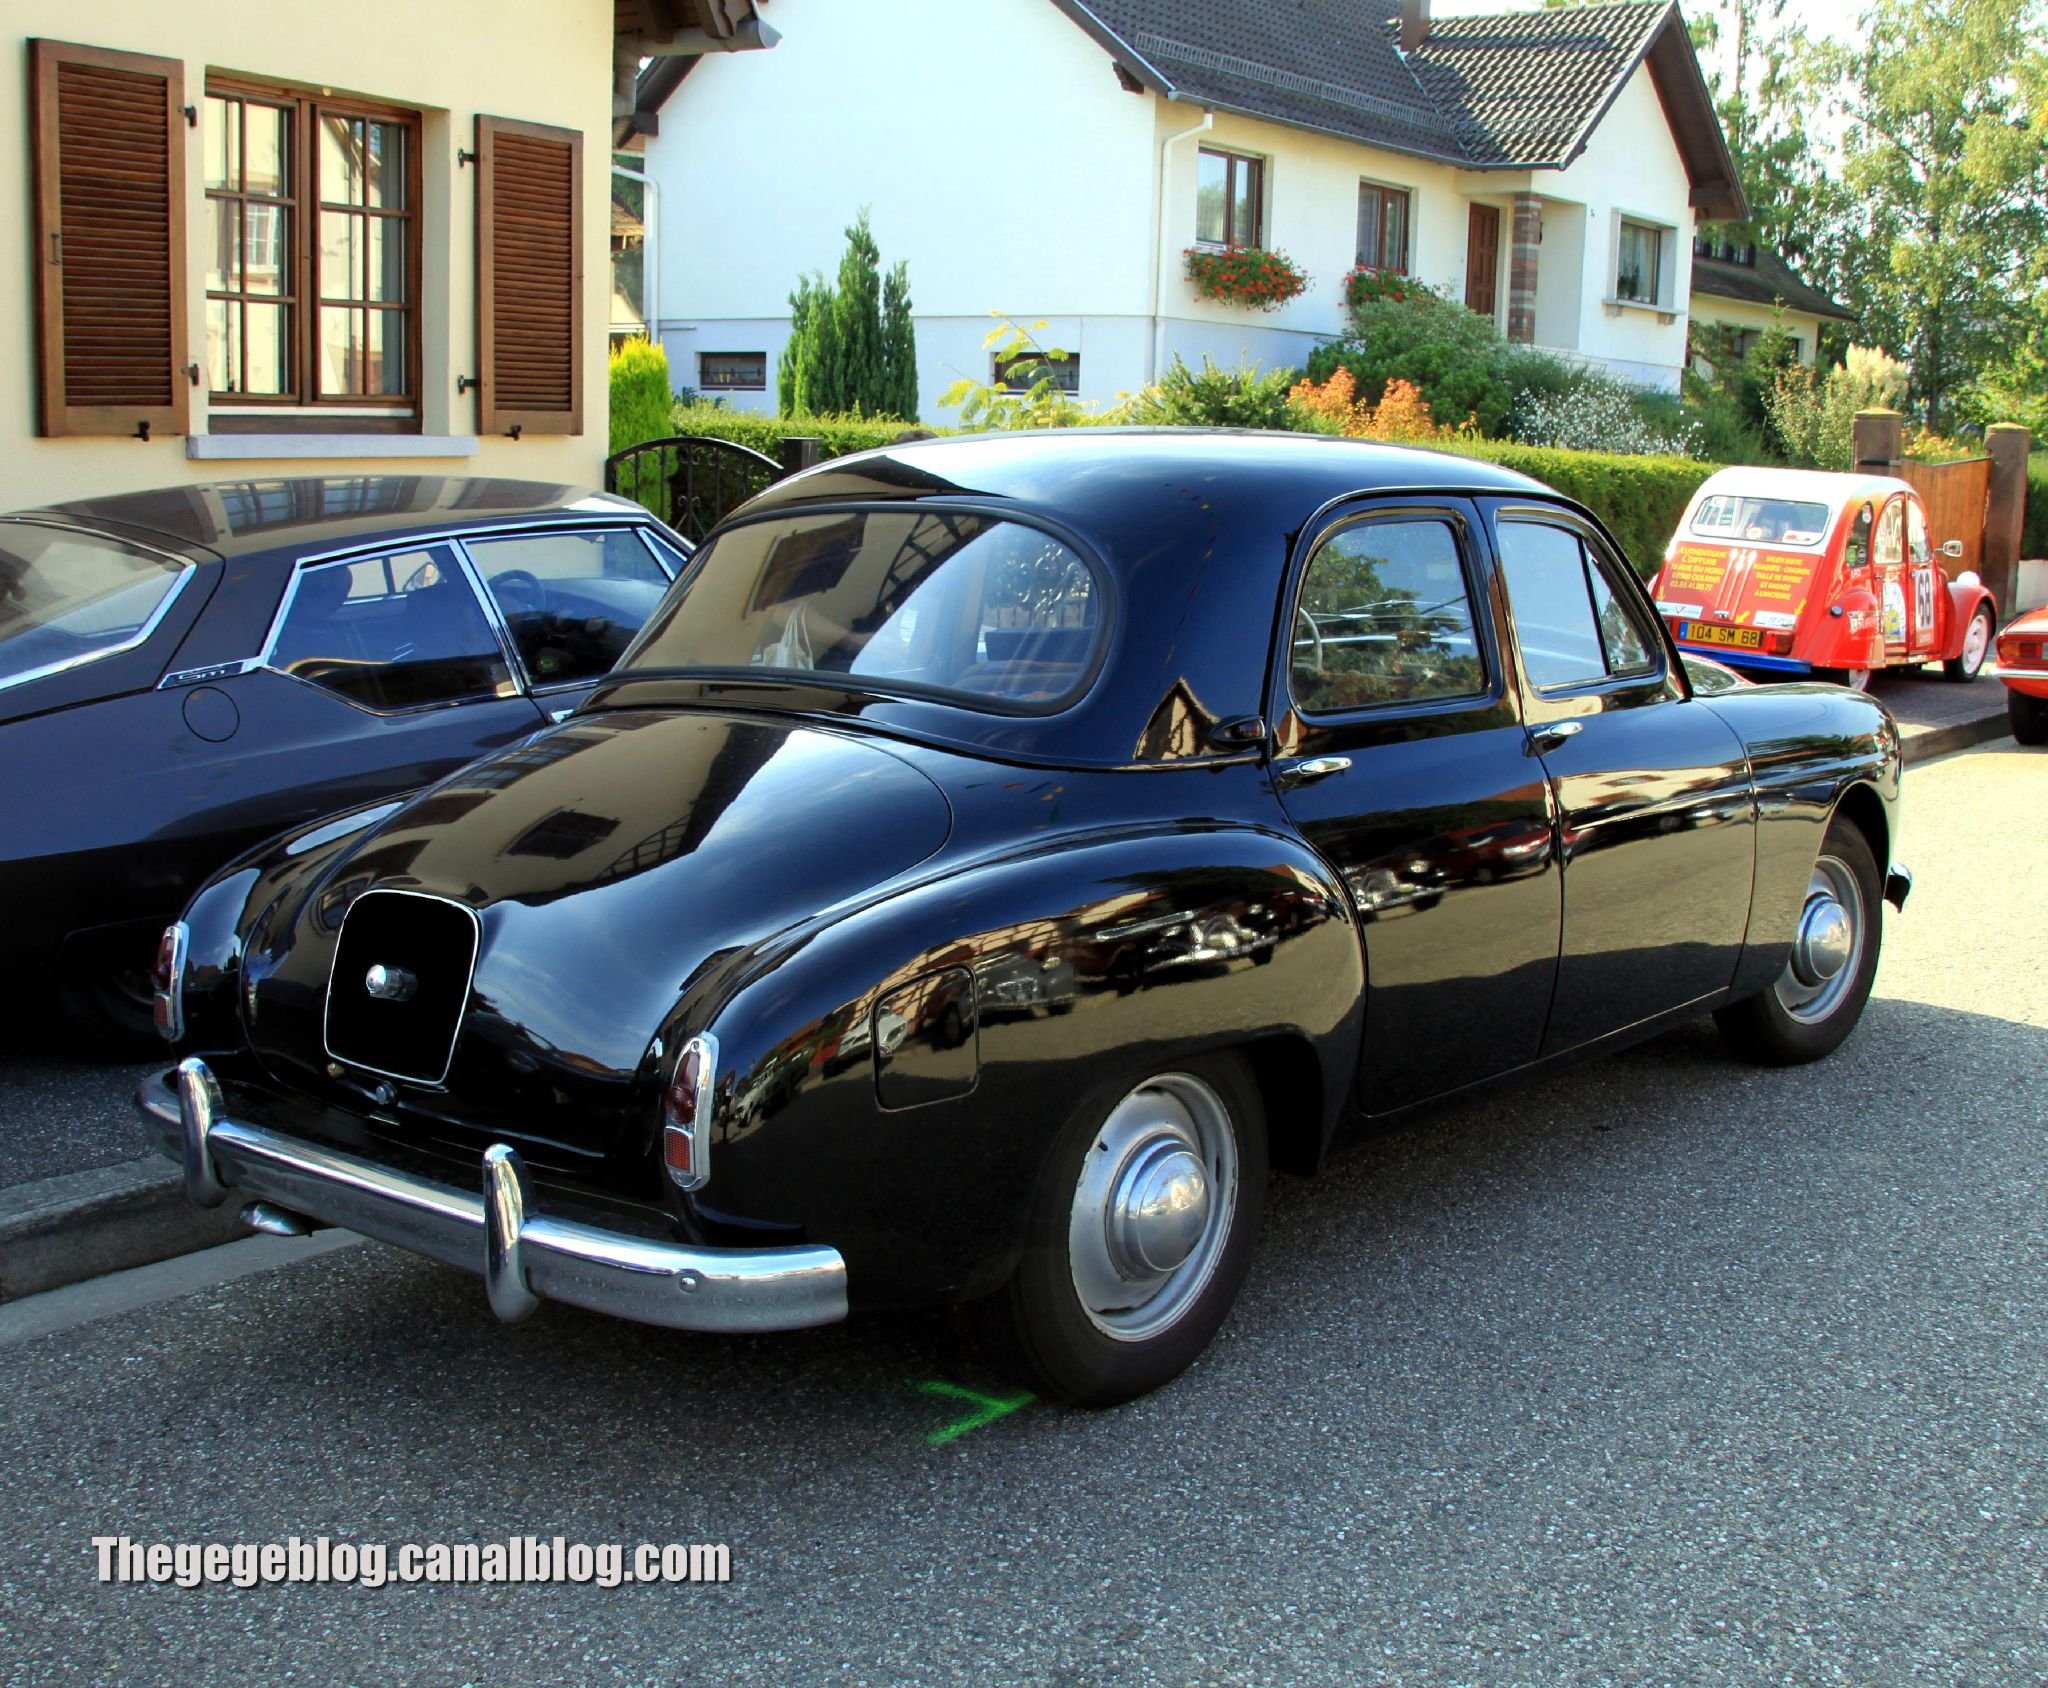 renault, Fregate, Cars, Classic, French, Wagon Wallpaper